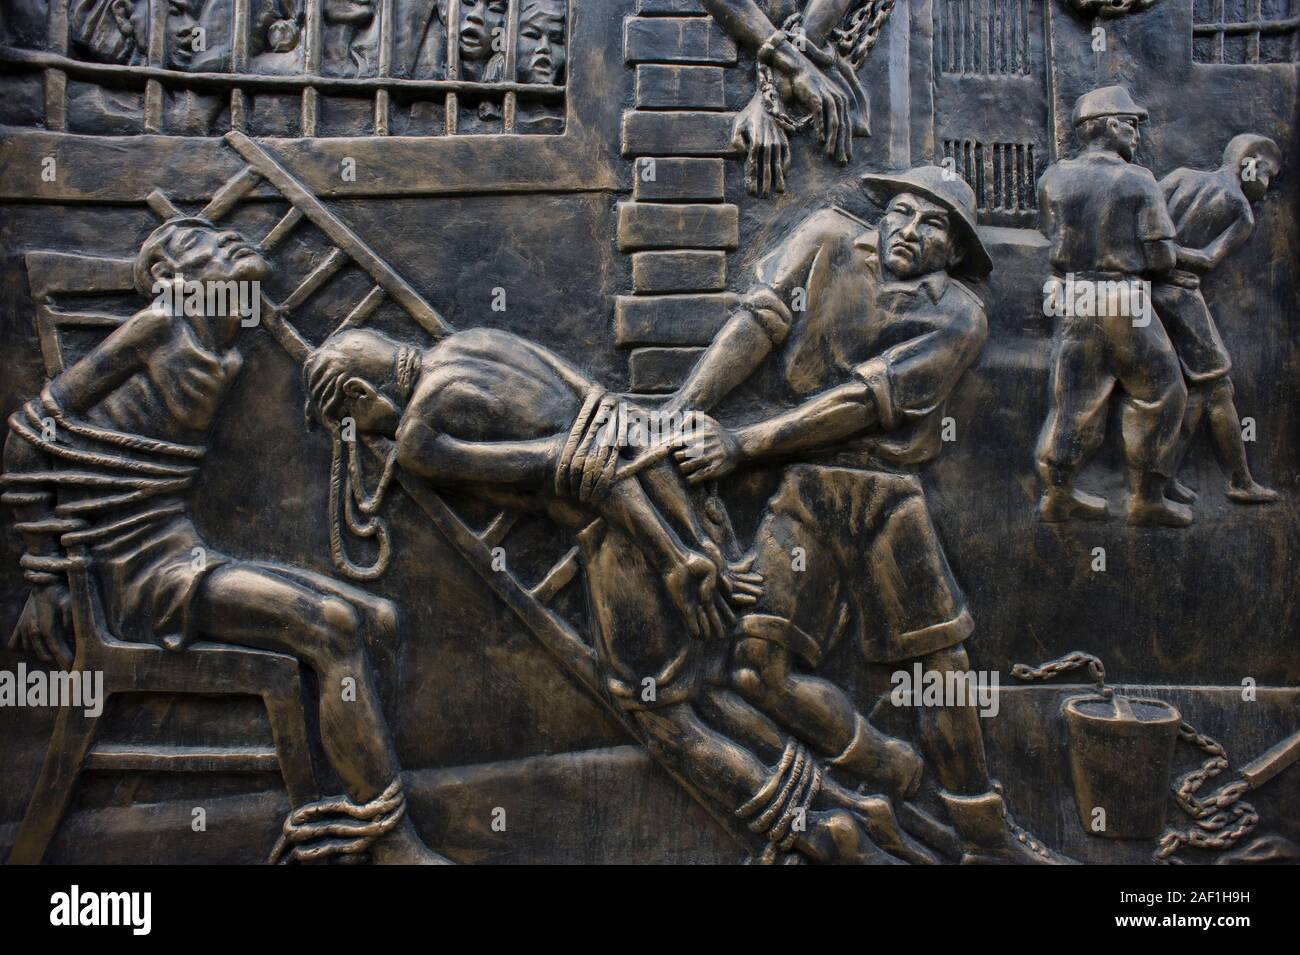 Hanoi, Vietnam - March 31, 2011: Sculpture in a bronze wall at Maison Centrale with the history of torture practice against war prisoners Stock Photo